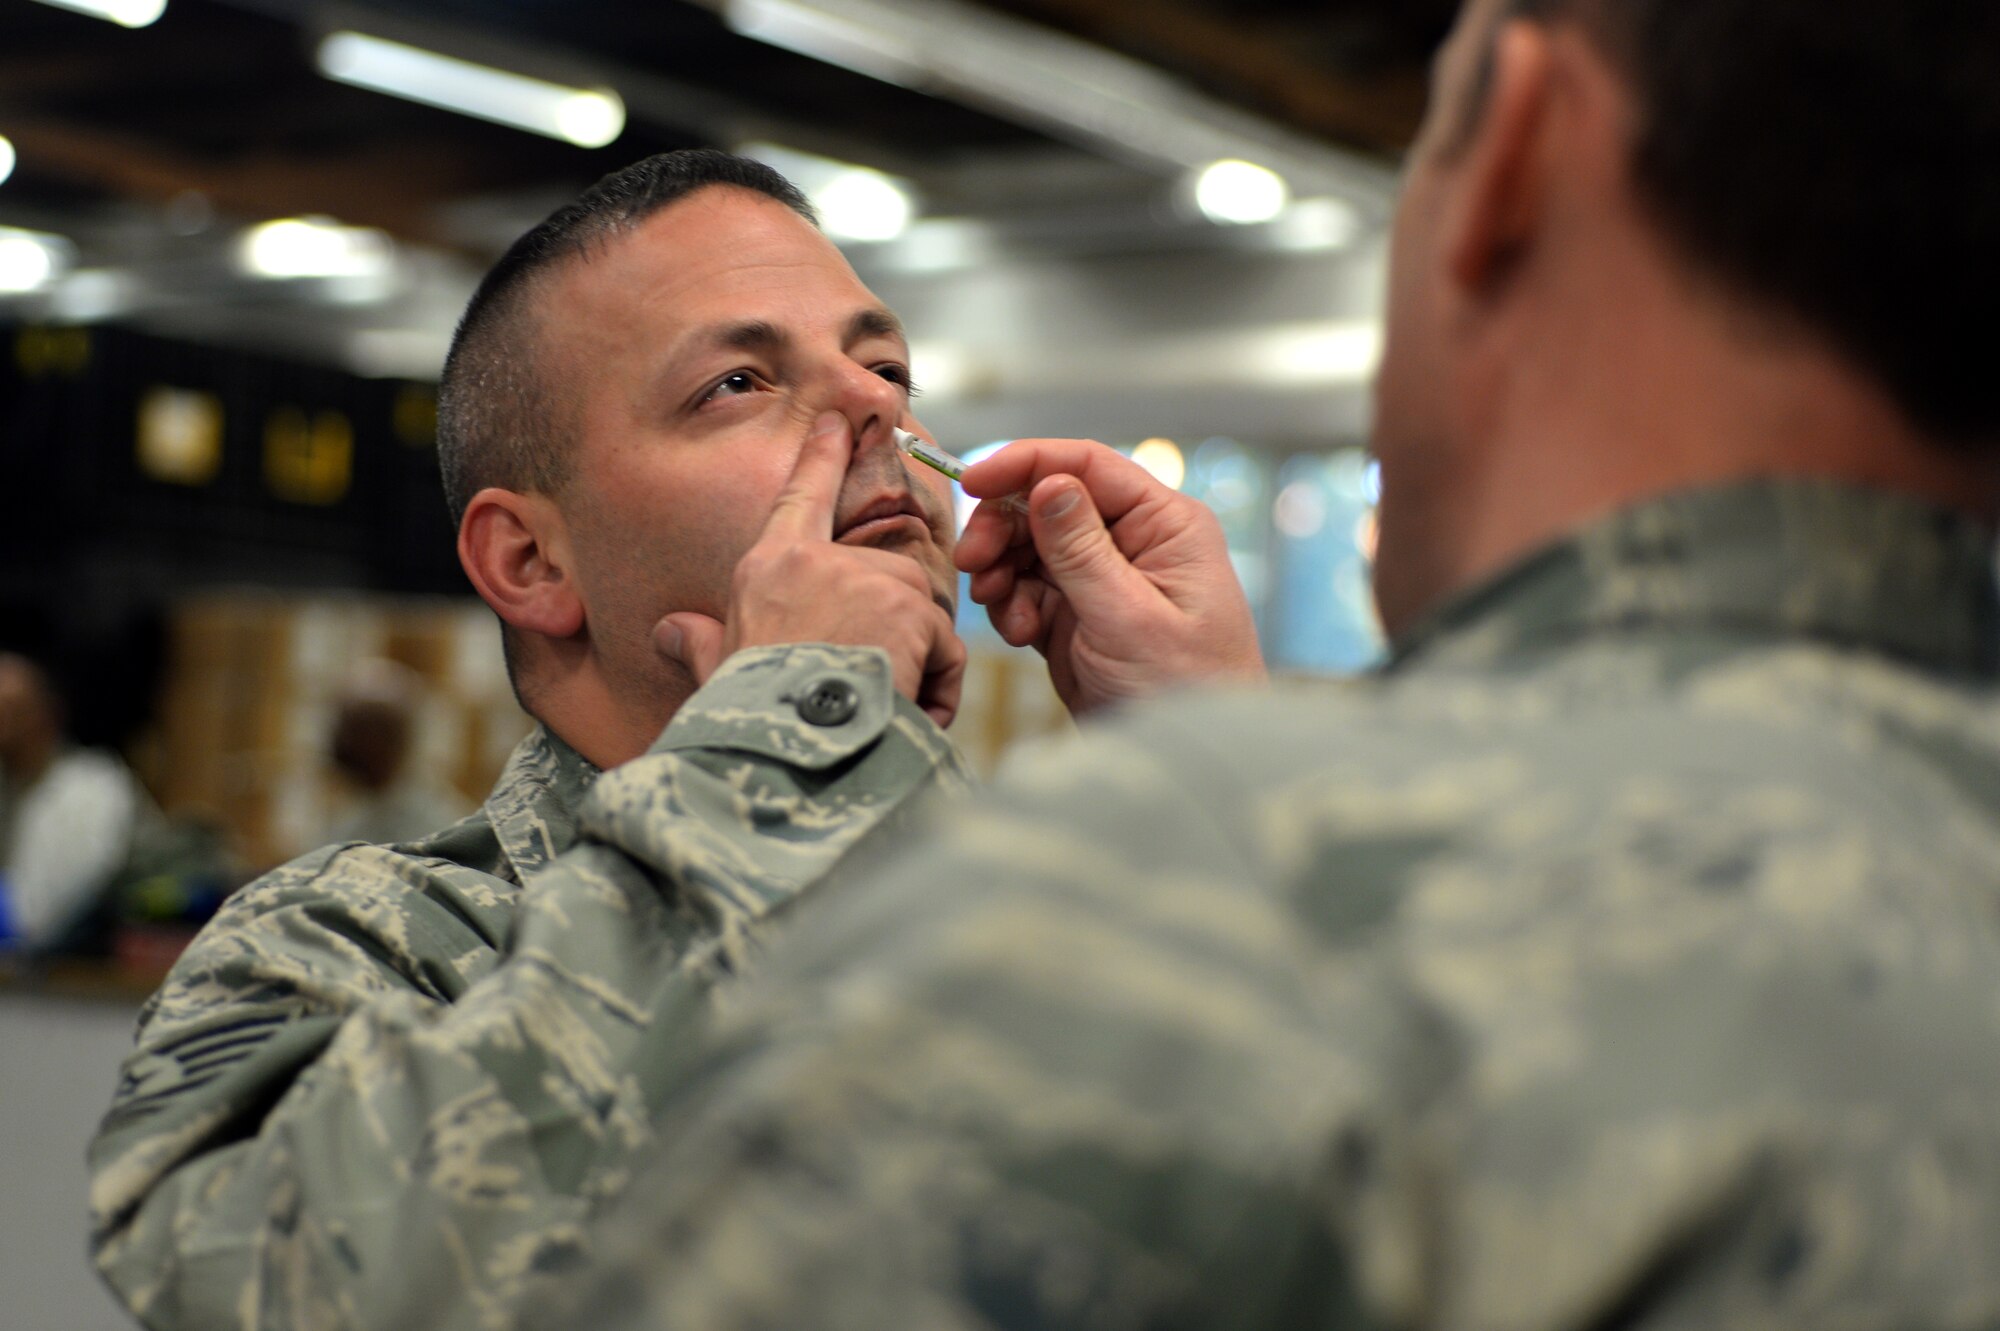 SPANGDAHLEM AIR BASE, Germany—Tech. Sgt. Damian Horton, 52nd Aircraft Maintenance Squadron flightline expediter, from Cooper City, Fla., receives his flu mist injection during a medical exercise Oct. 16, 2013. The 52nd Public Health Emergency Office leveraged the exercise to demonstrate the wing's capability to service the base population in the event of a disease threat or outbreak as efficiently as possible. (U.S. Air Force photo by Senior Airman Alexis Siekert/Released)